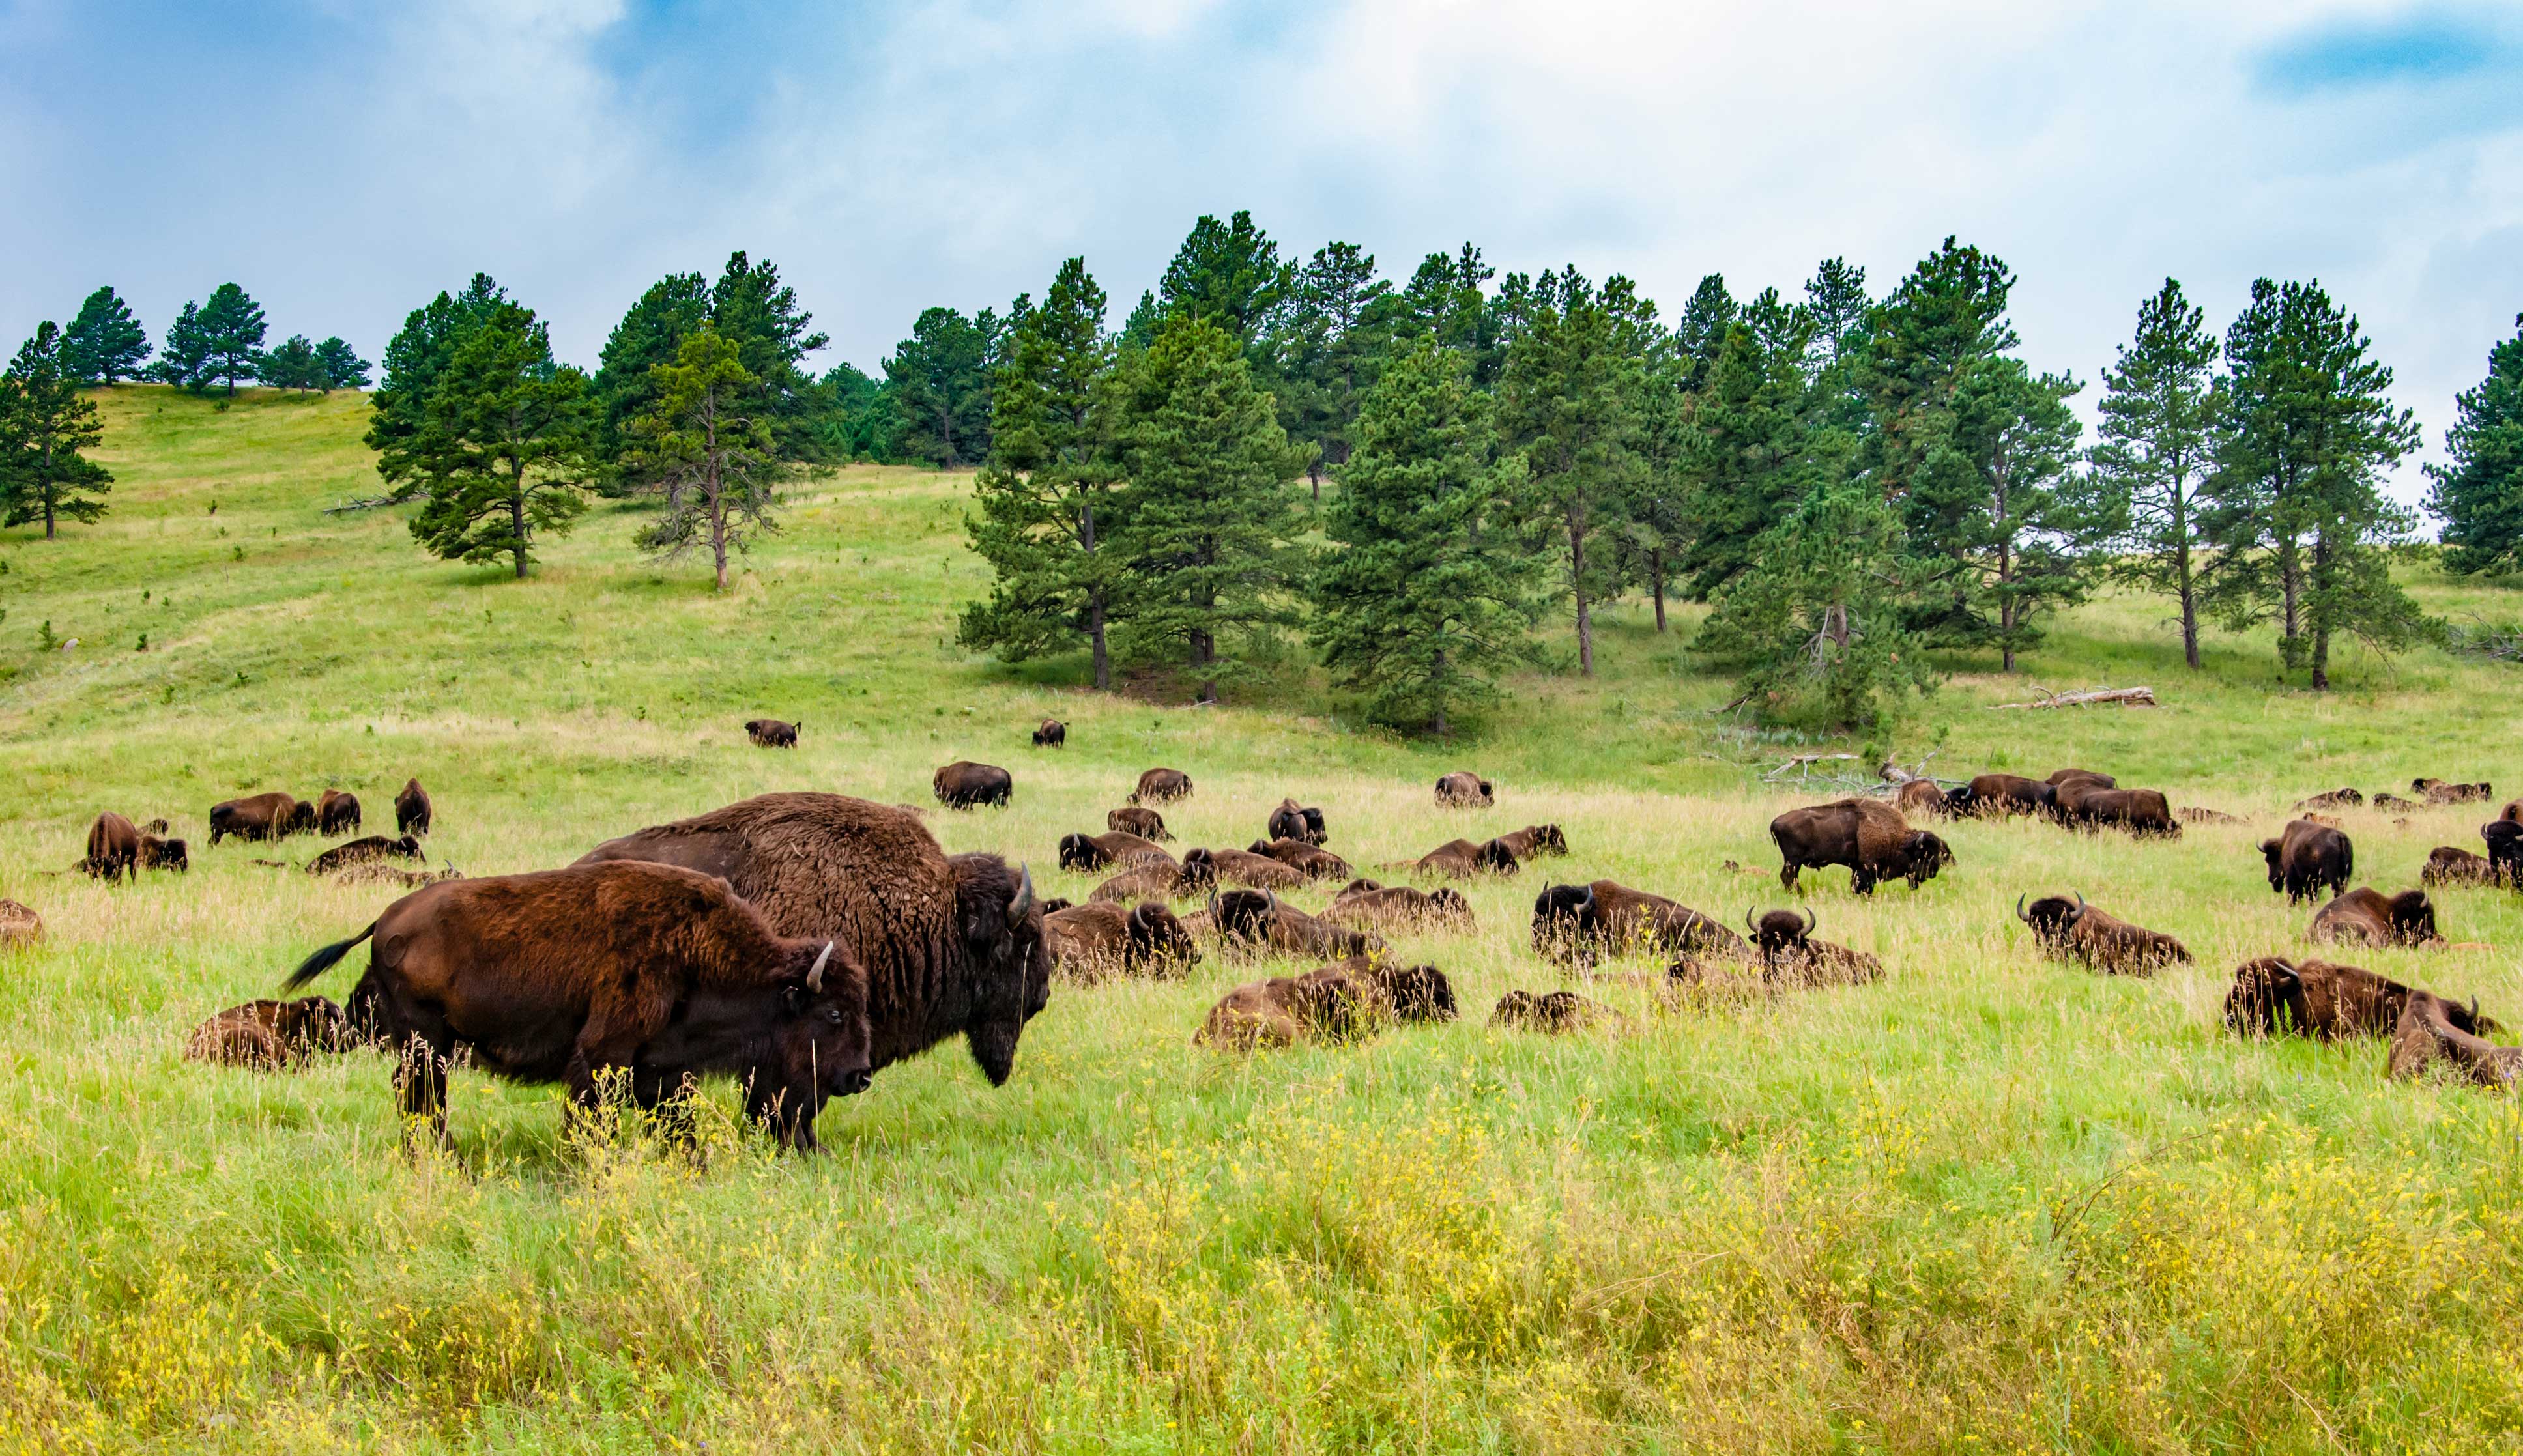 A bunch of bison laying in a field.